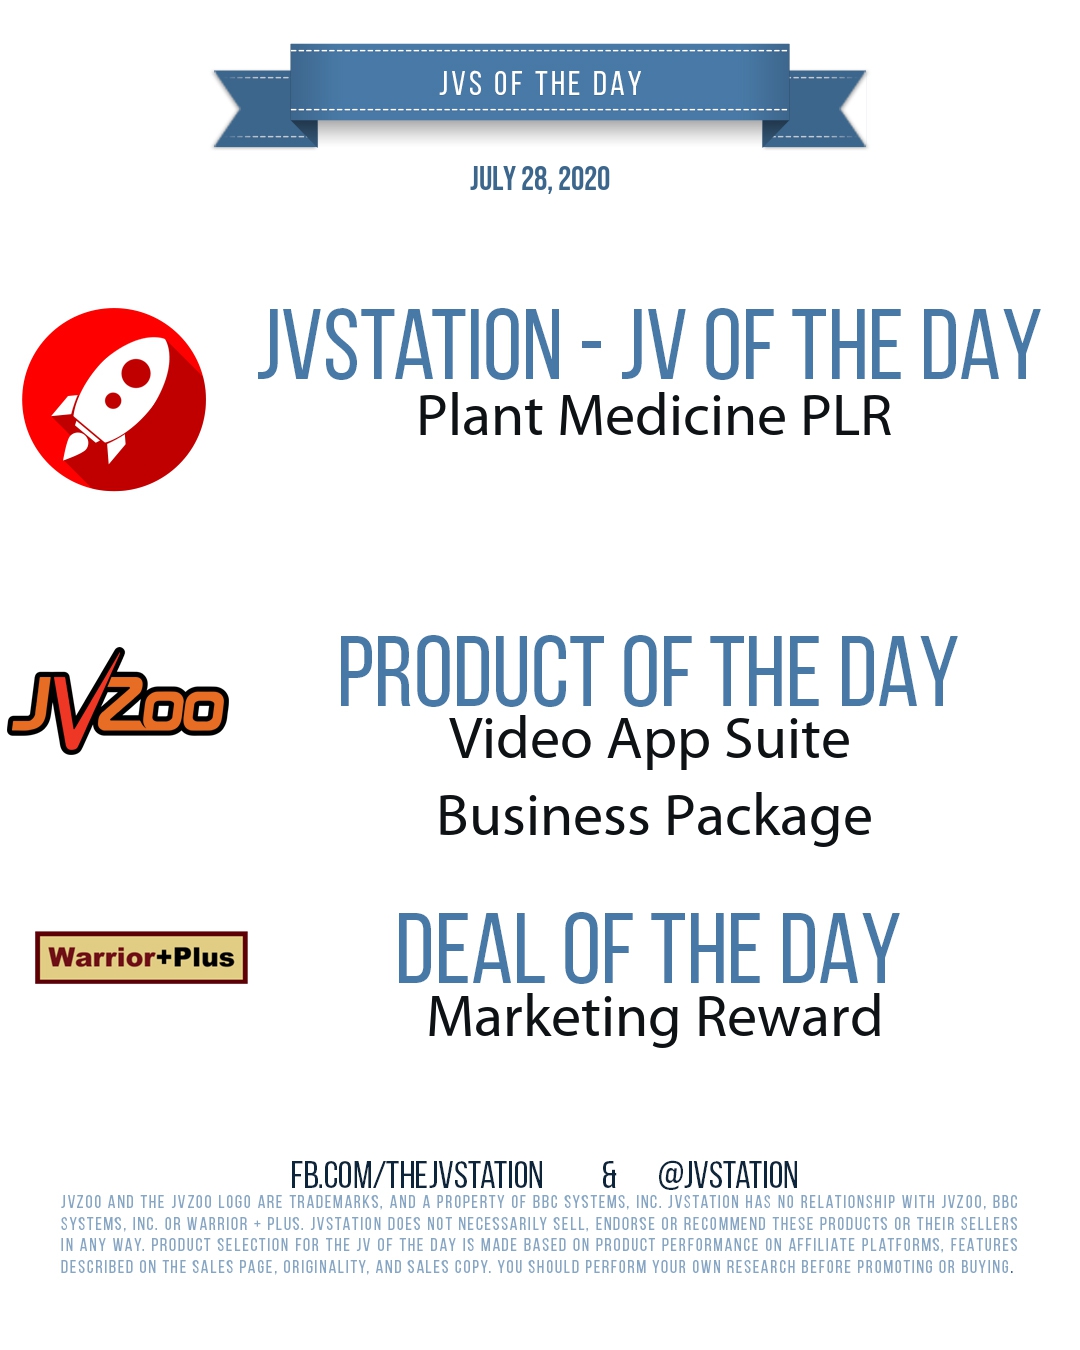 JVs of the day - July 28, 2020